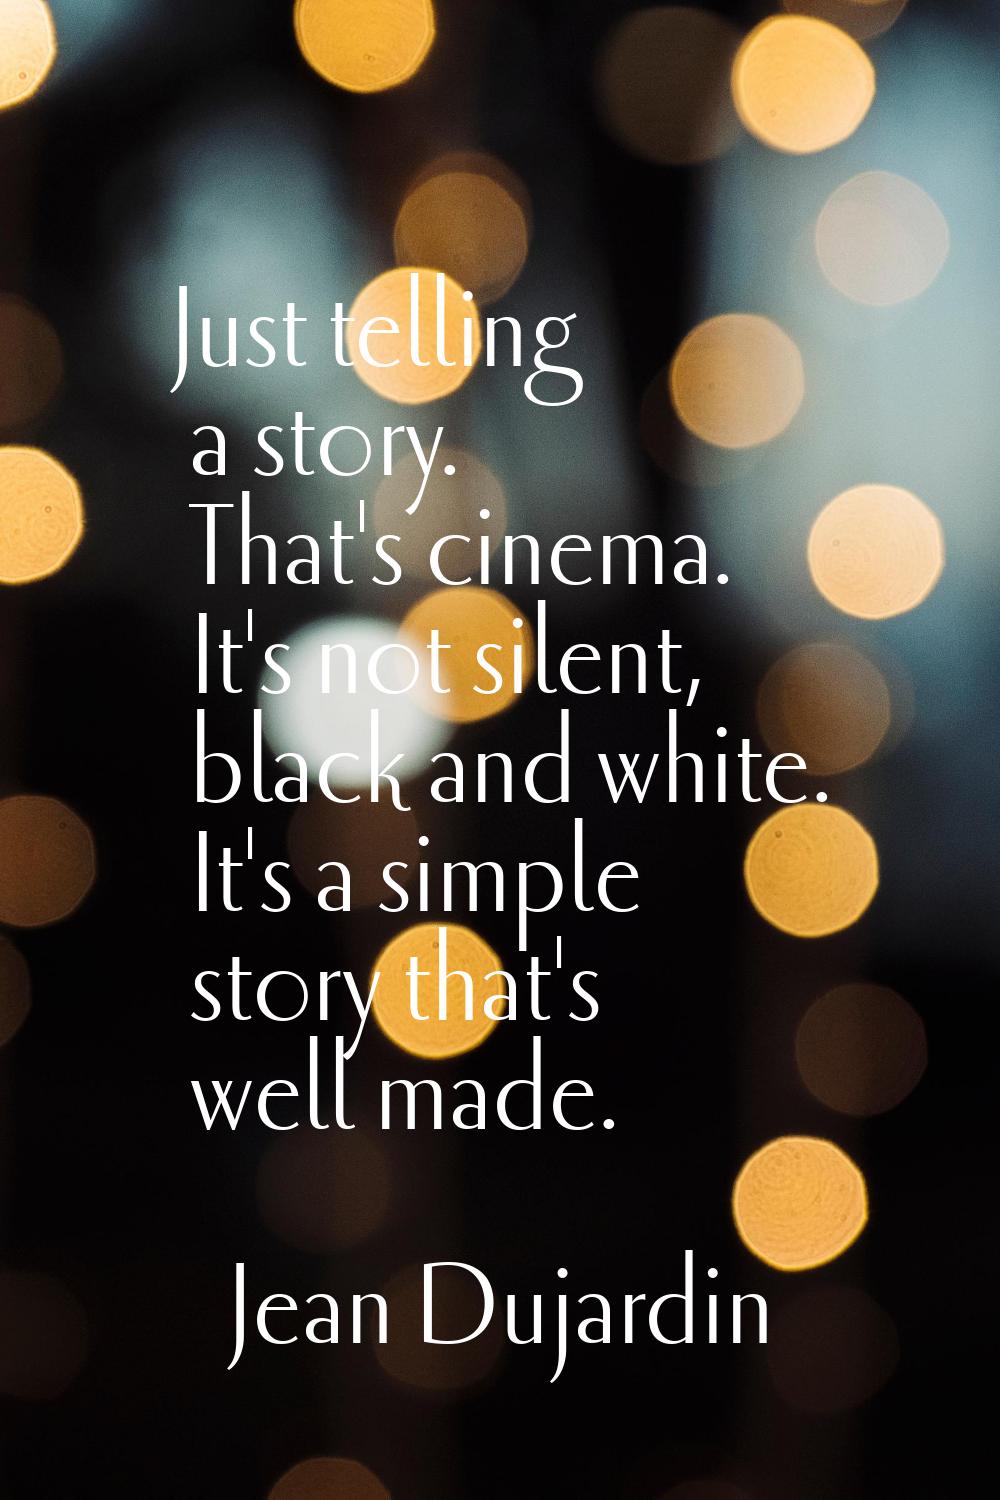 Just telling a story. That's cinema. It's not silent, black and white. It's a simple story that's w